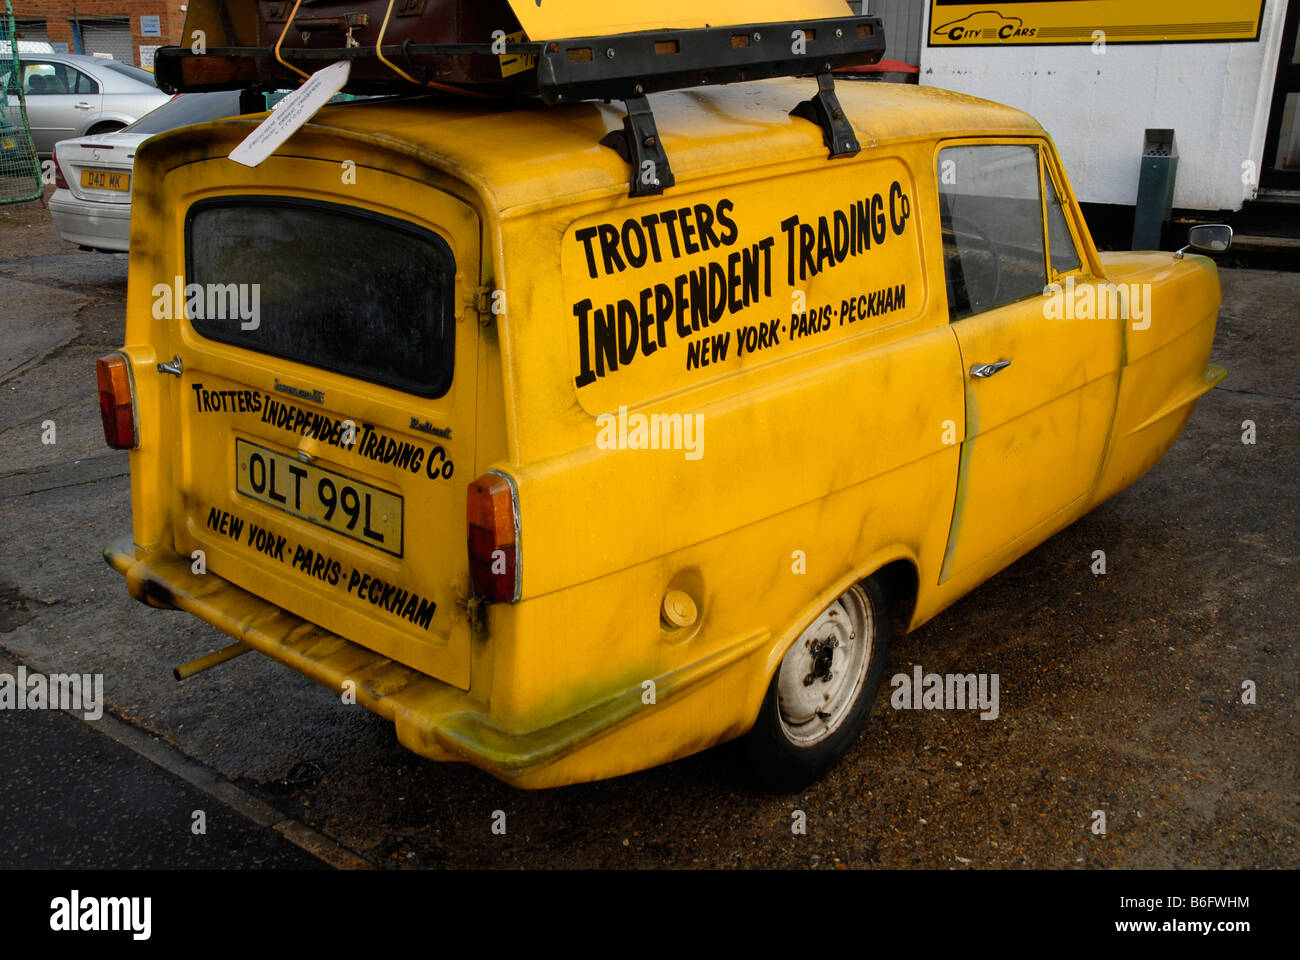 A reliant robin car painted with the logo of Trotters Independent Trading Co. Stock Photo